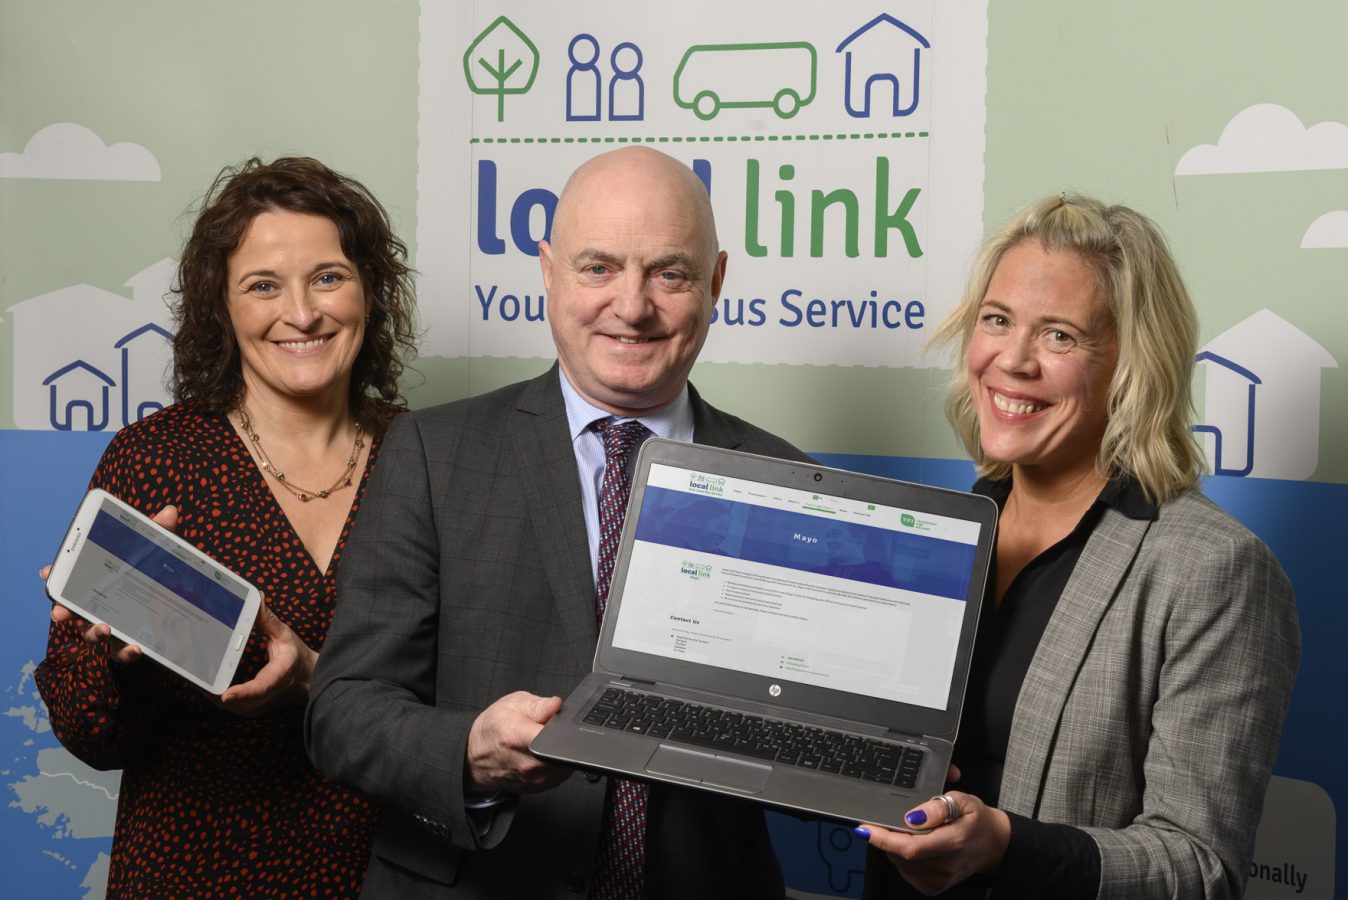 Sarah Togher, Peter Hynes and Orlagh Denneny pictured together for website launch